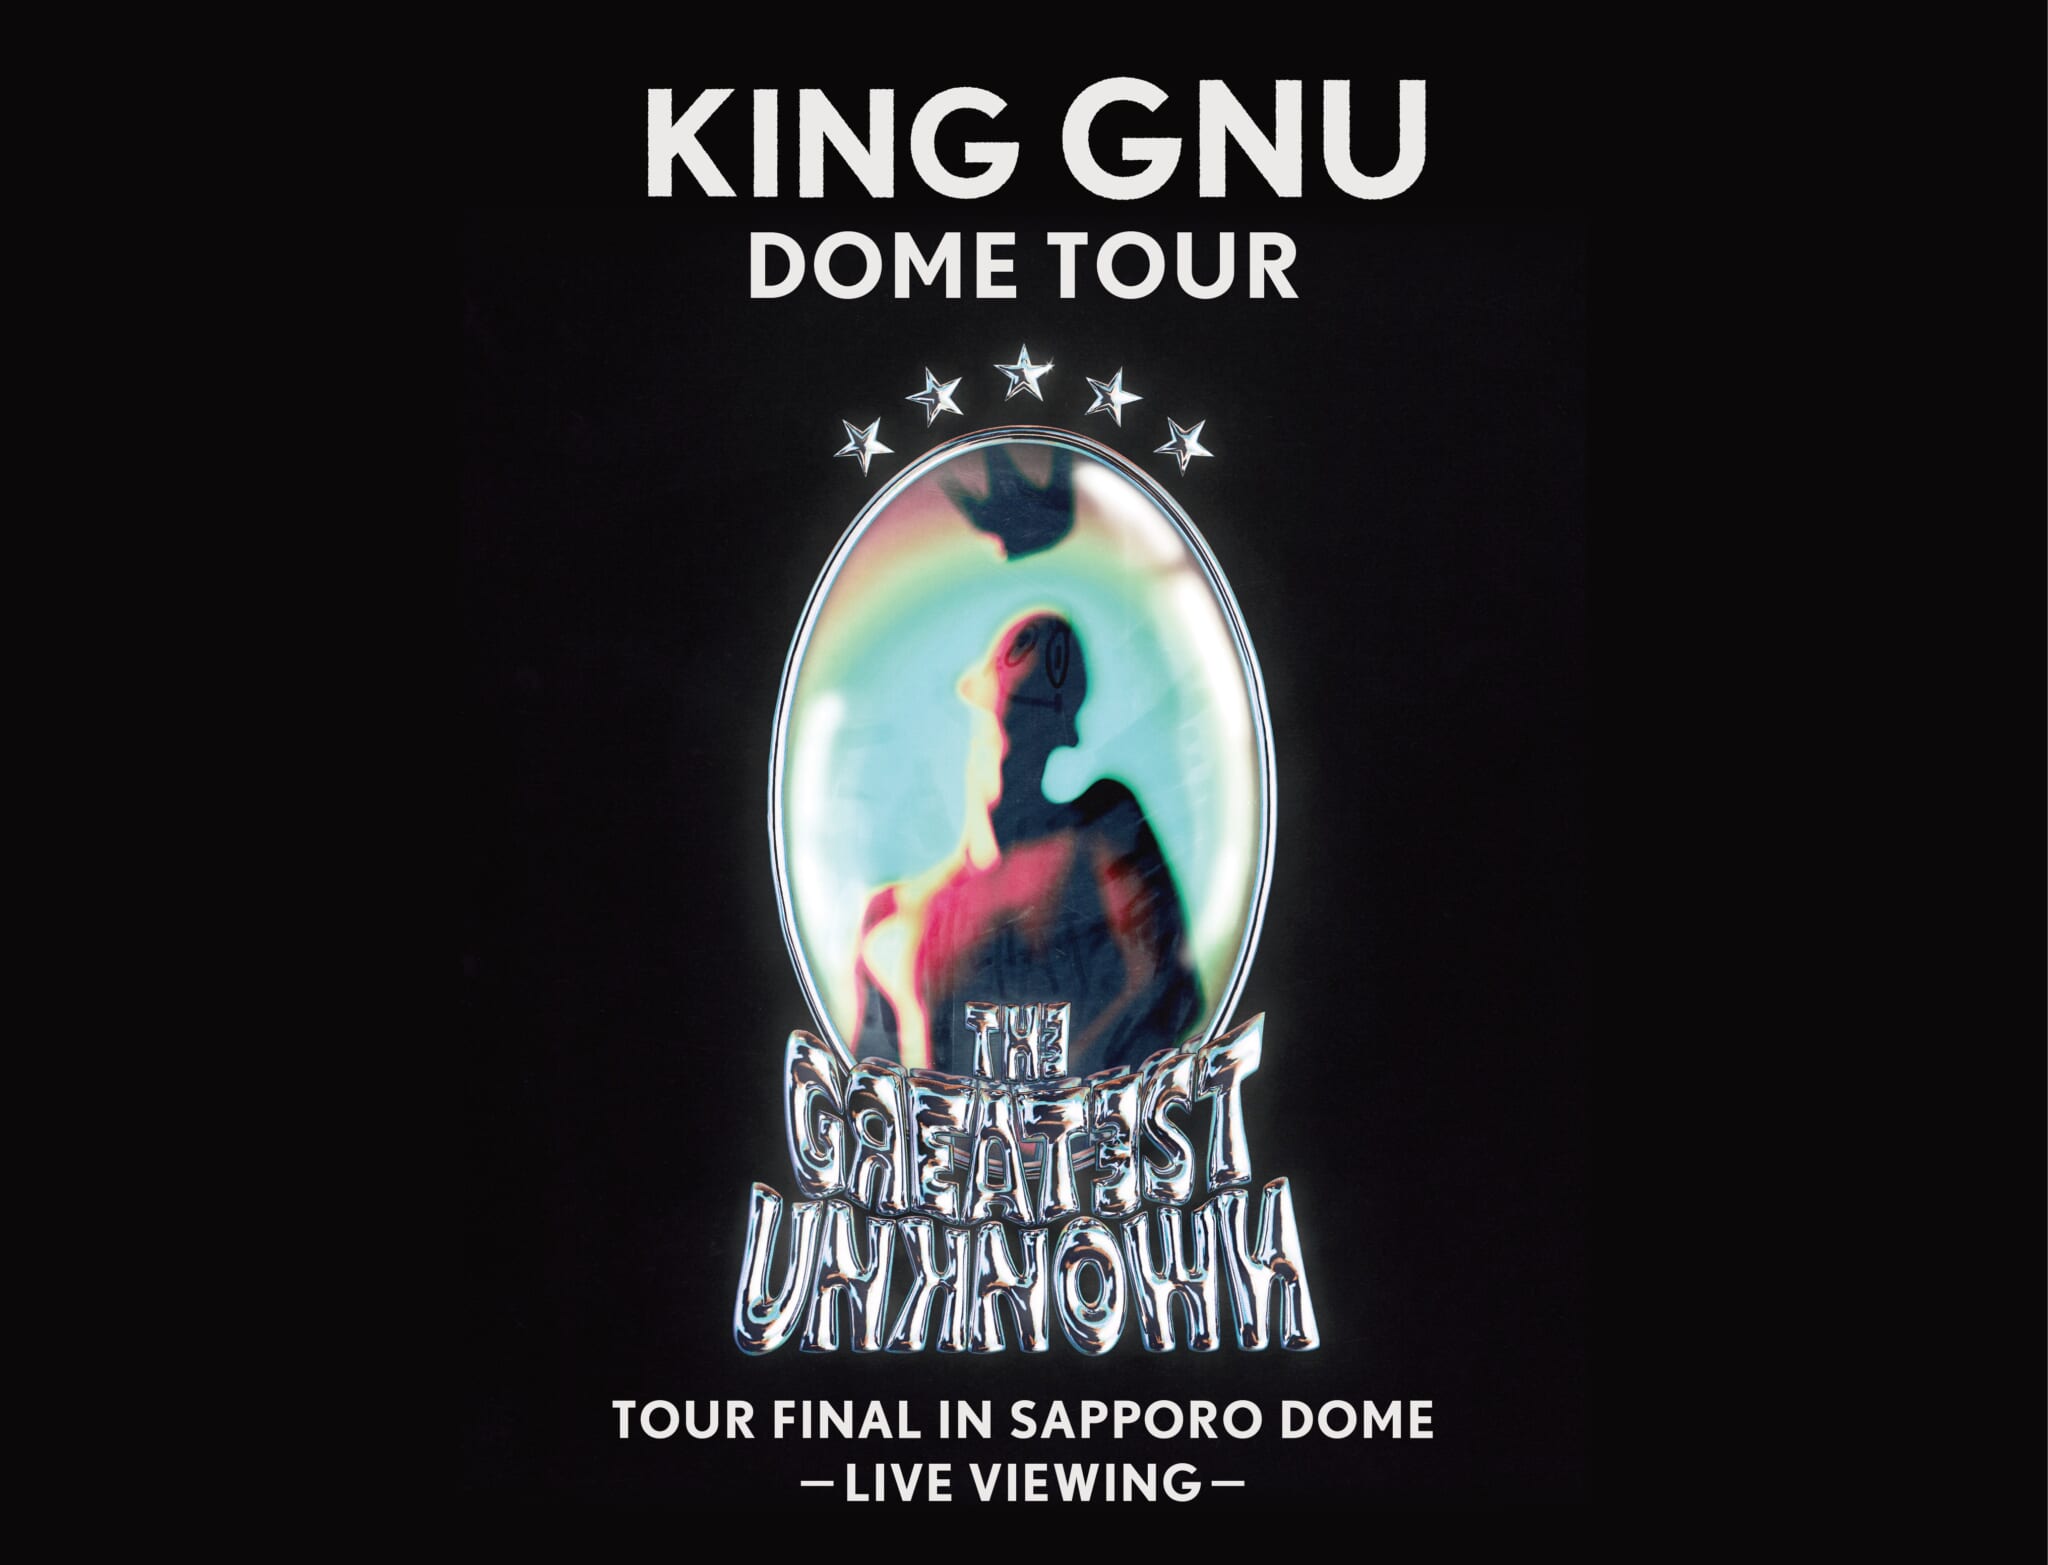 King Gnu Dome Tour「THE GREATEST UNKNOWN」TOUR FINAL in Sapporo Dome ―LIVE VIEWING―｜3/23(土)映画館で生中継！